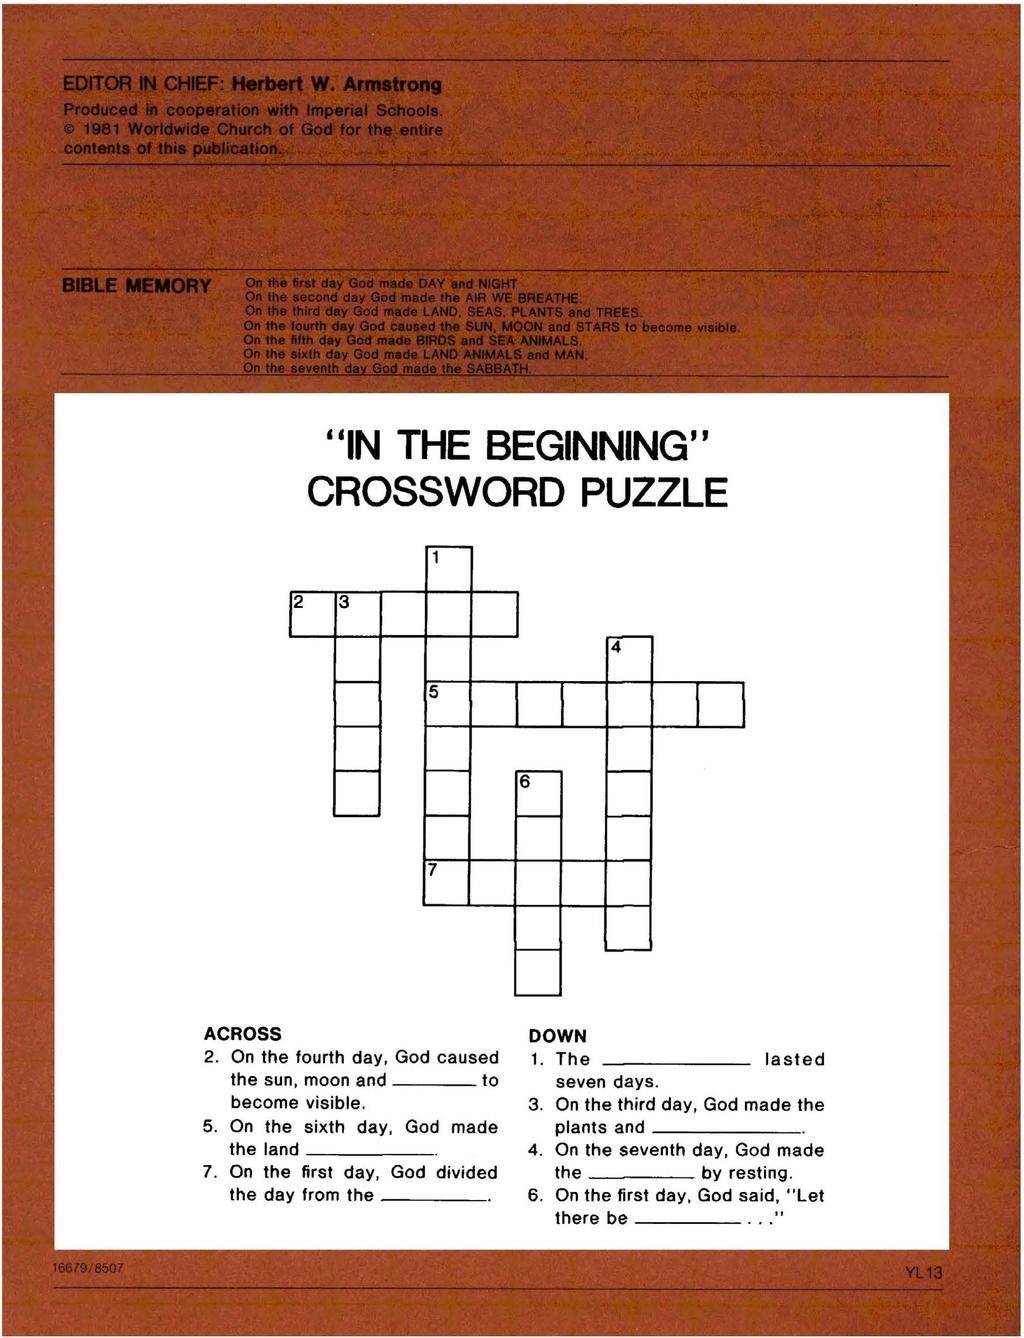 "IN THE BEGINNING" CROSSWORD PUZZLE 2 3 5 4 7 ACROSS DOWN 2. On the fourth day, God caused 1. The lasted the sun, moon and to seven days. become visible. 3. On the third day, God made the 5.